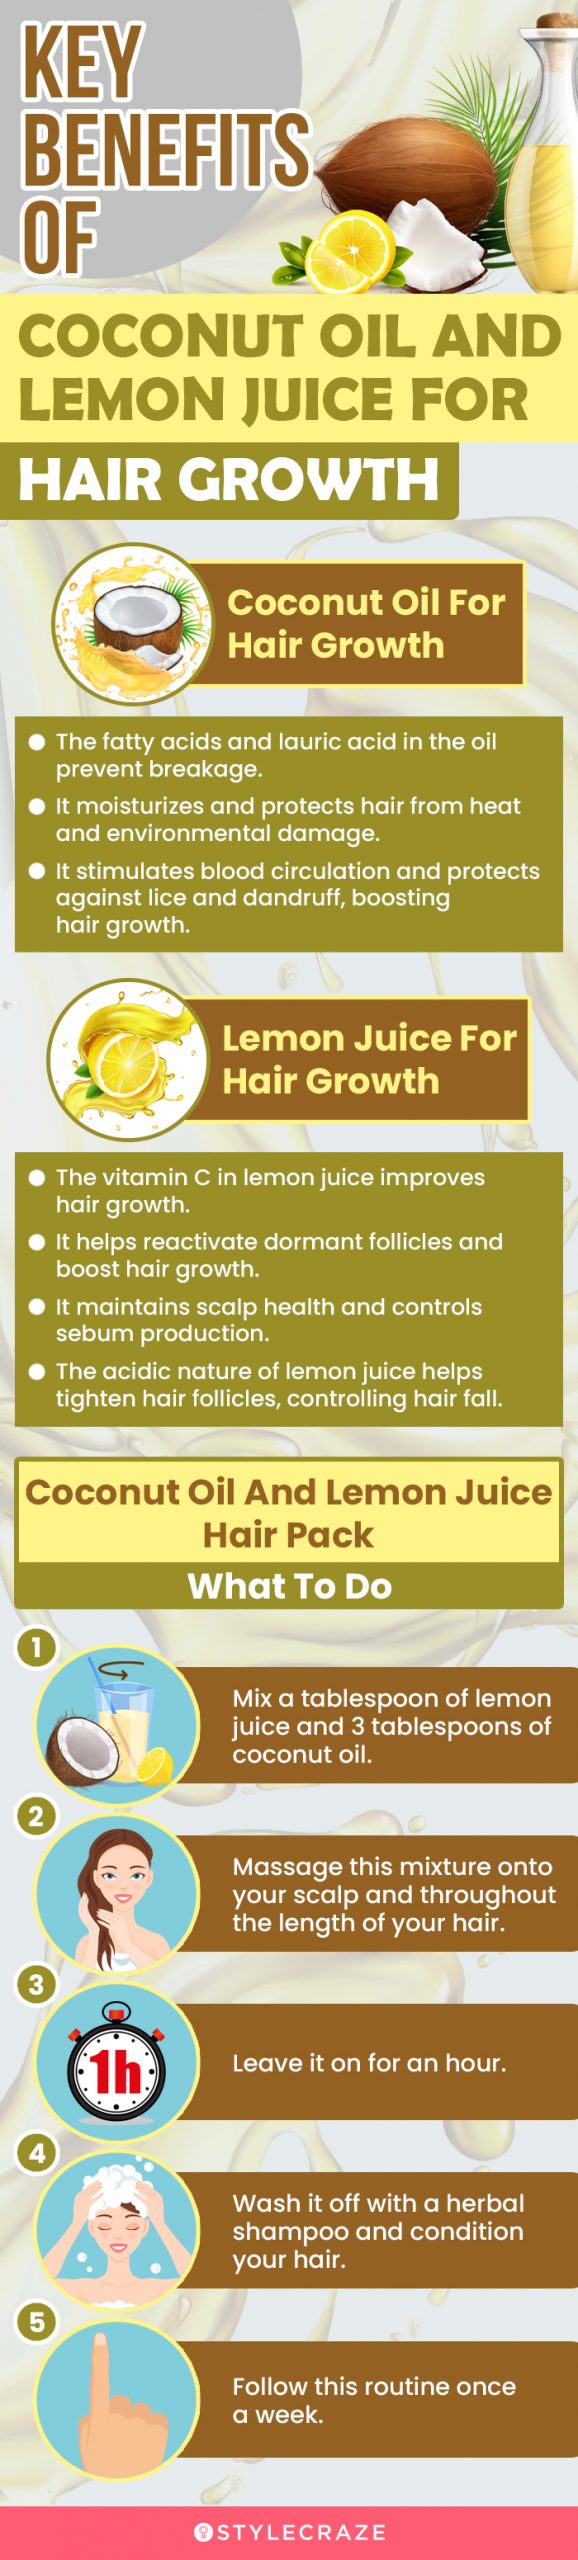 key benefits of coconut oil and lemon juice for hair growth (infographic)